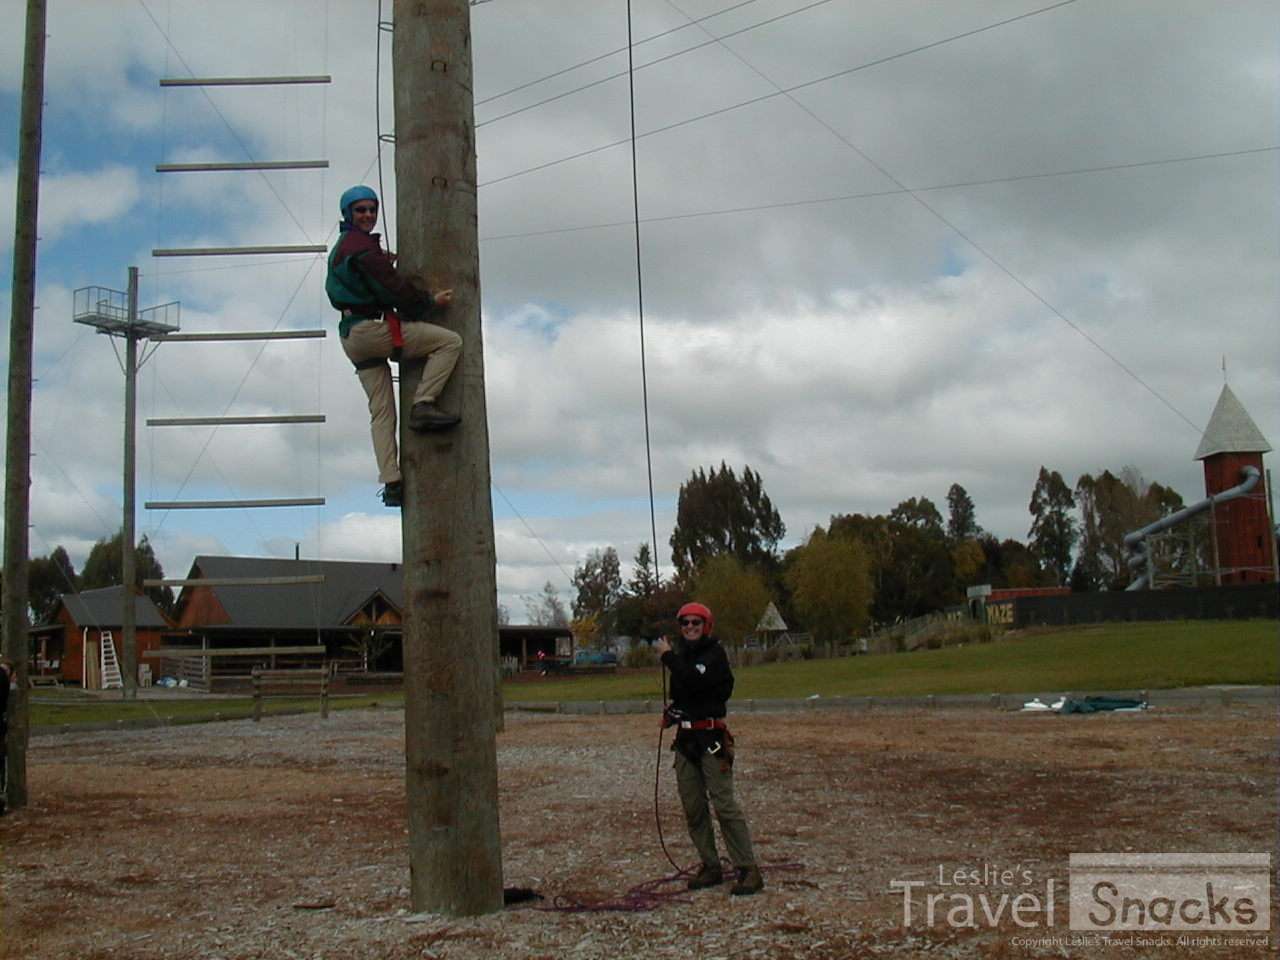 Ropes course, oh boy.